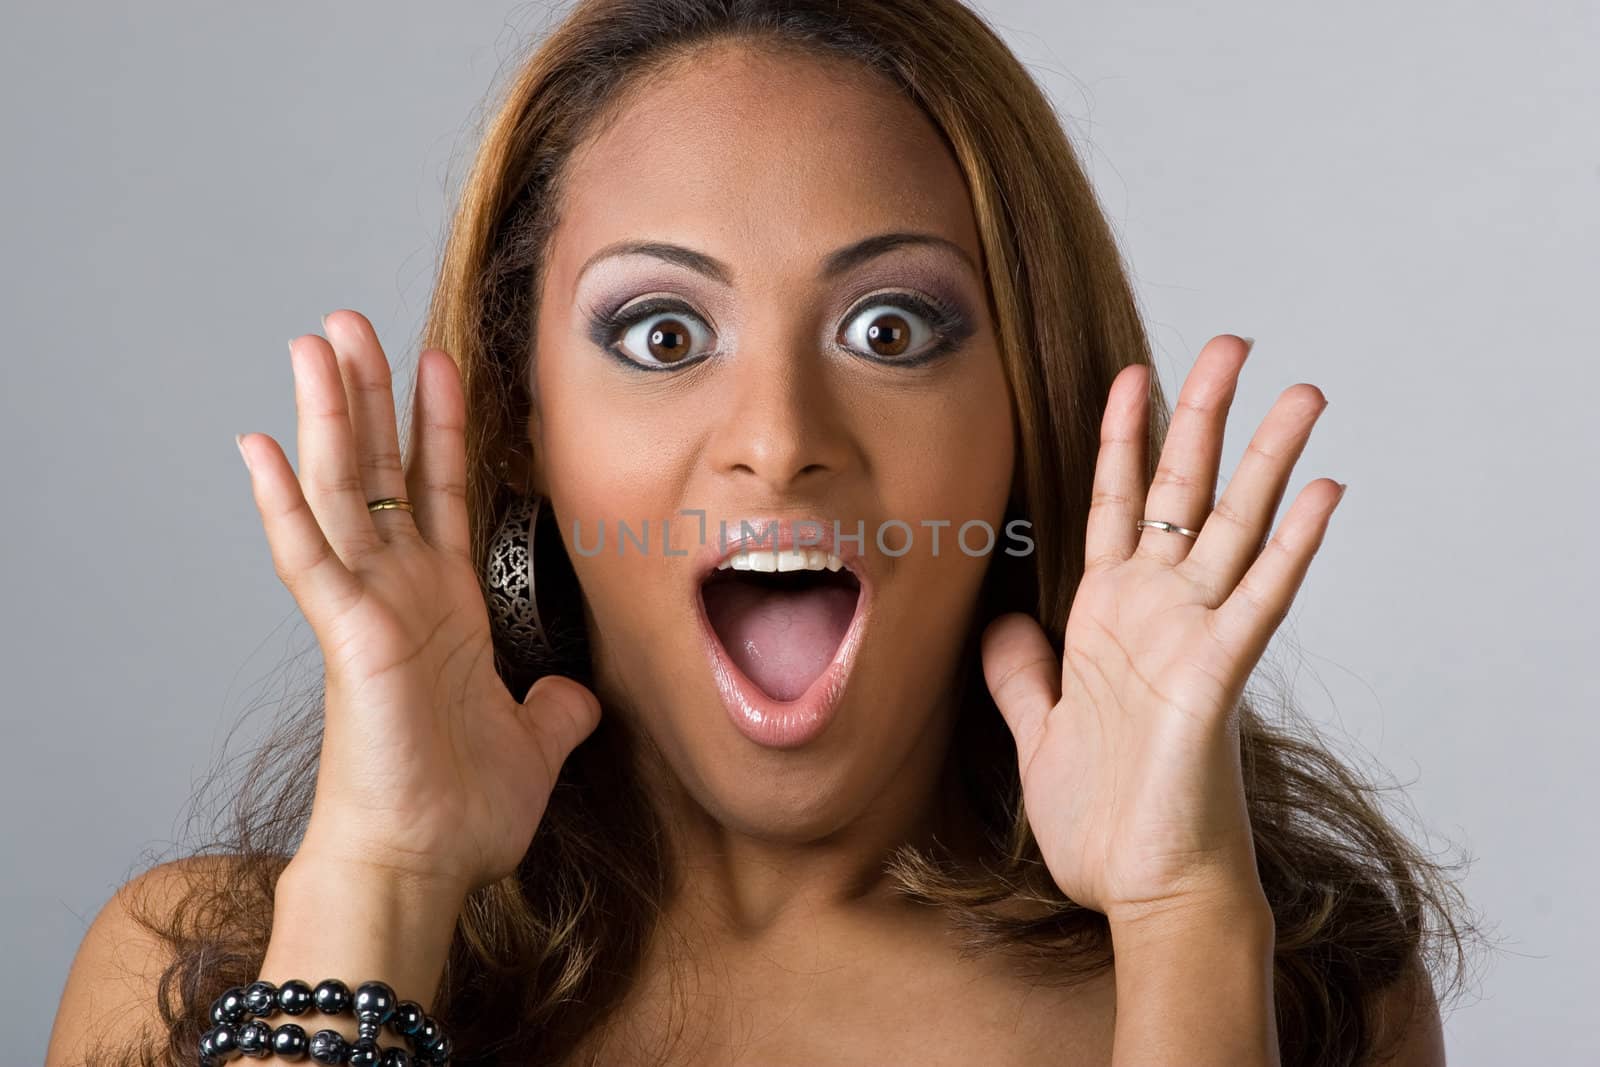 This young hispanic woman looks totally and completely surprised.